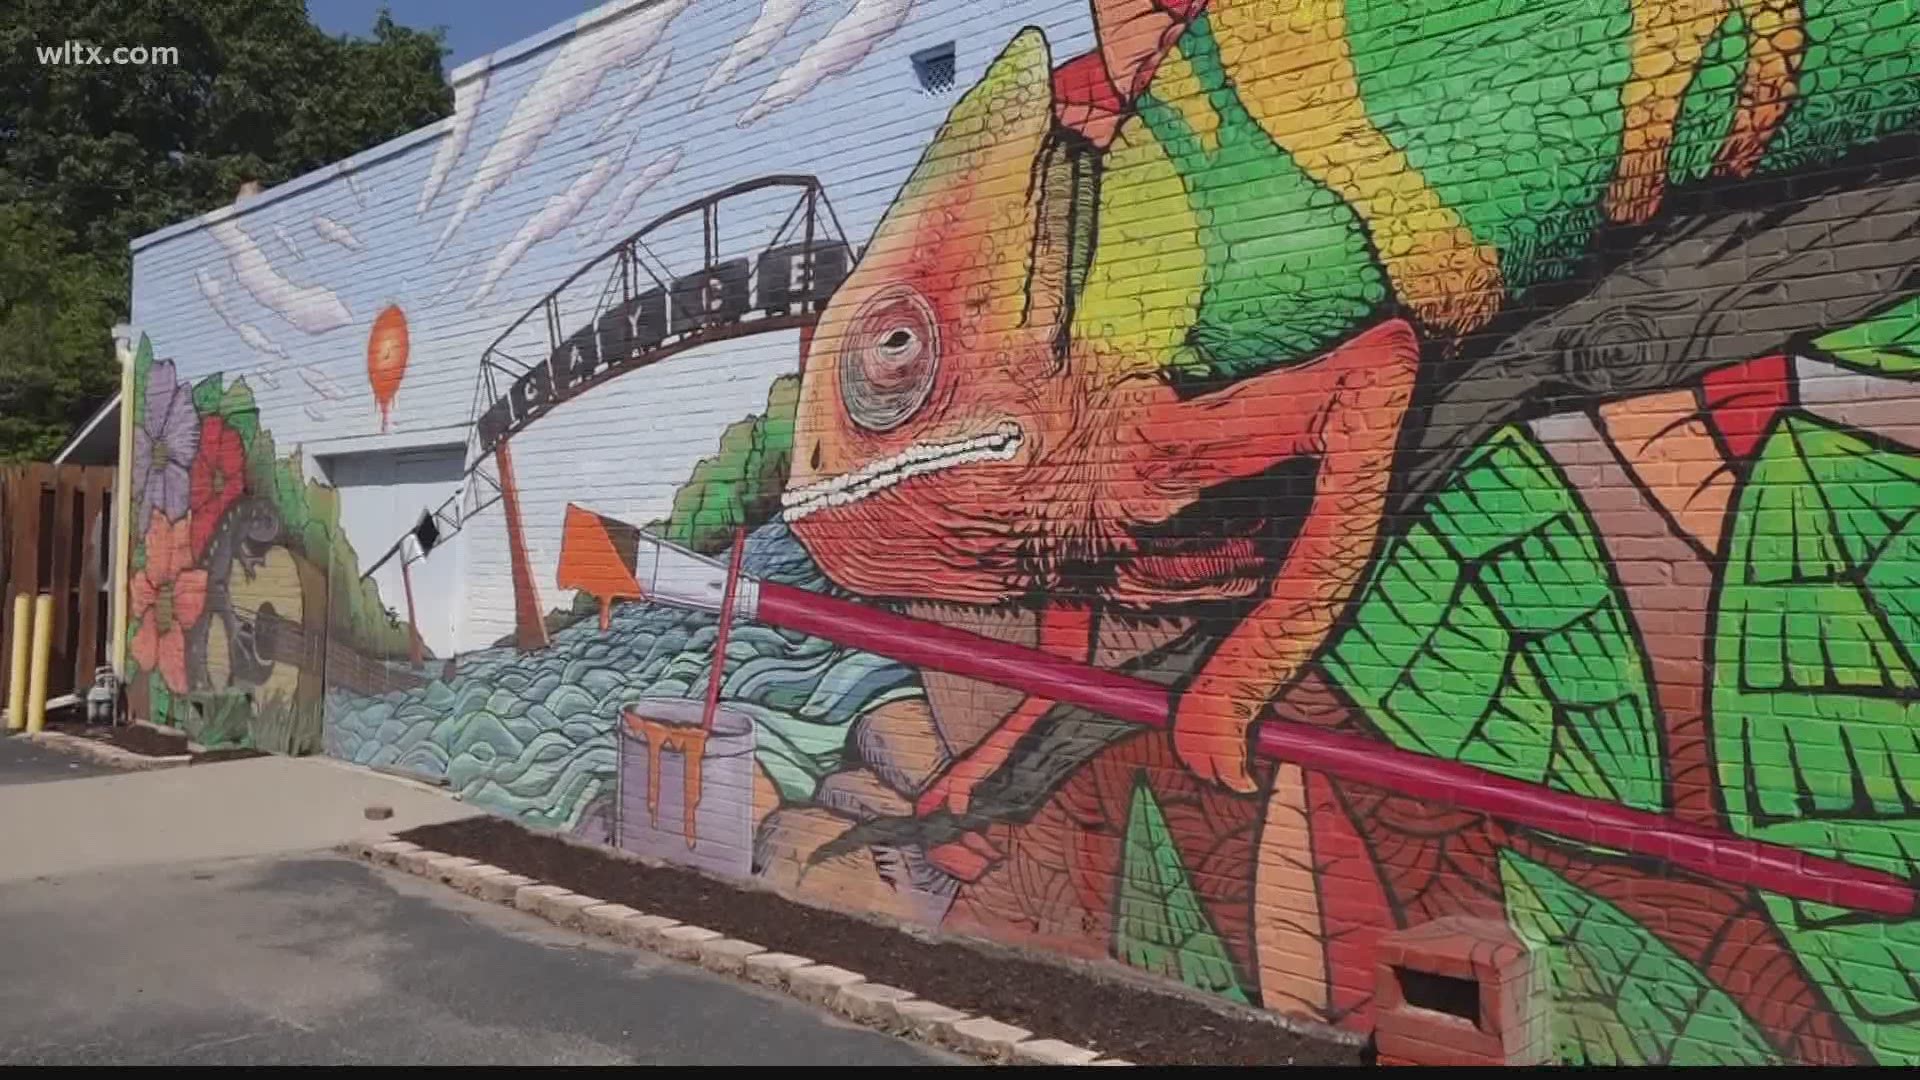 The city says they've received several grants to help bring in several murals and to create an art lot including sculptures and activation space.